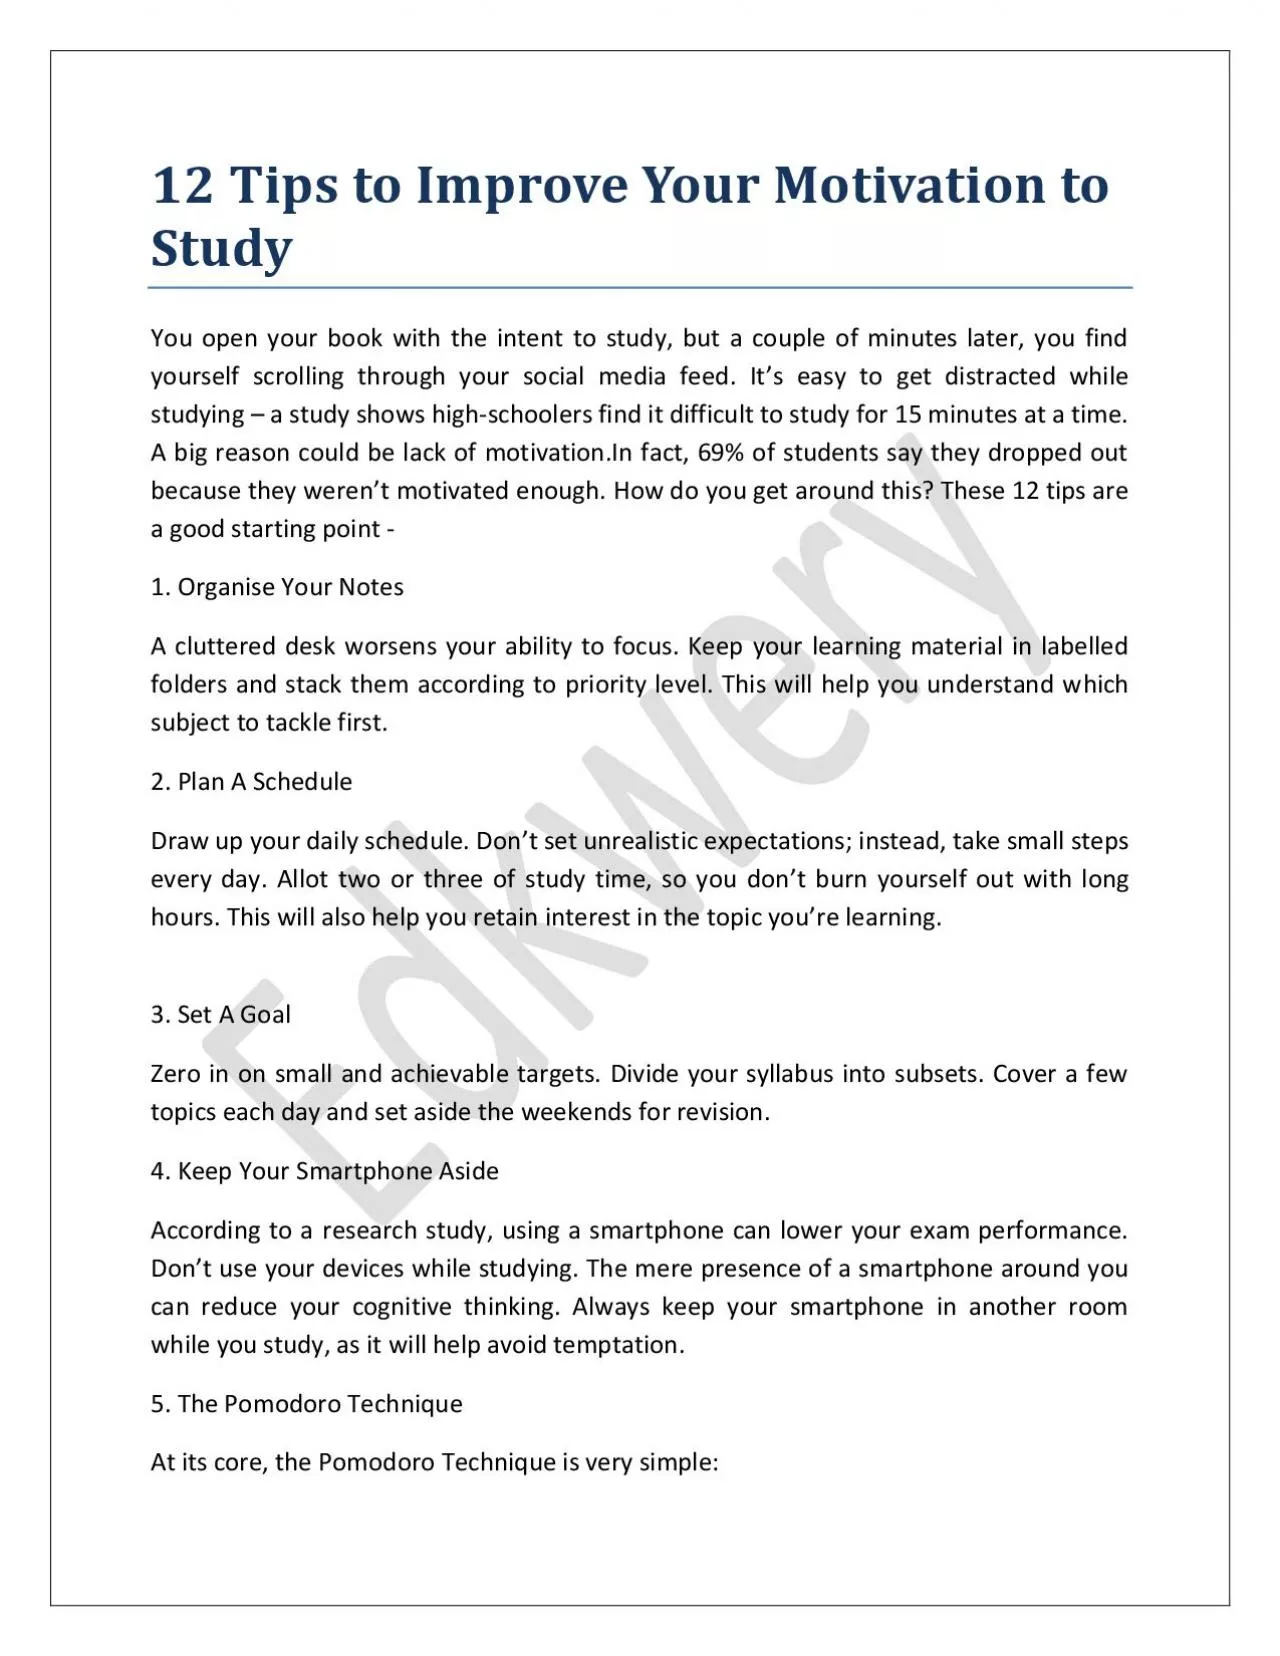 12 Tips to Improve Your Motivation to Study